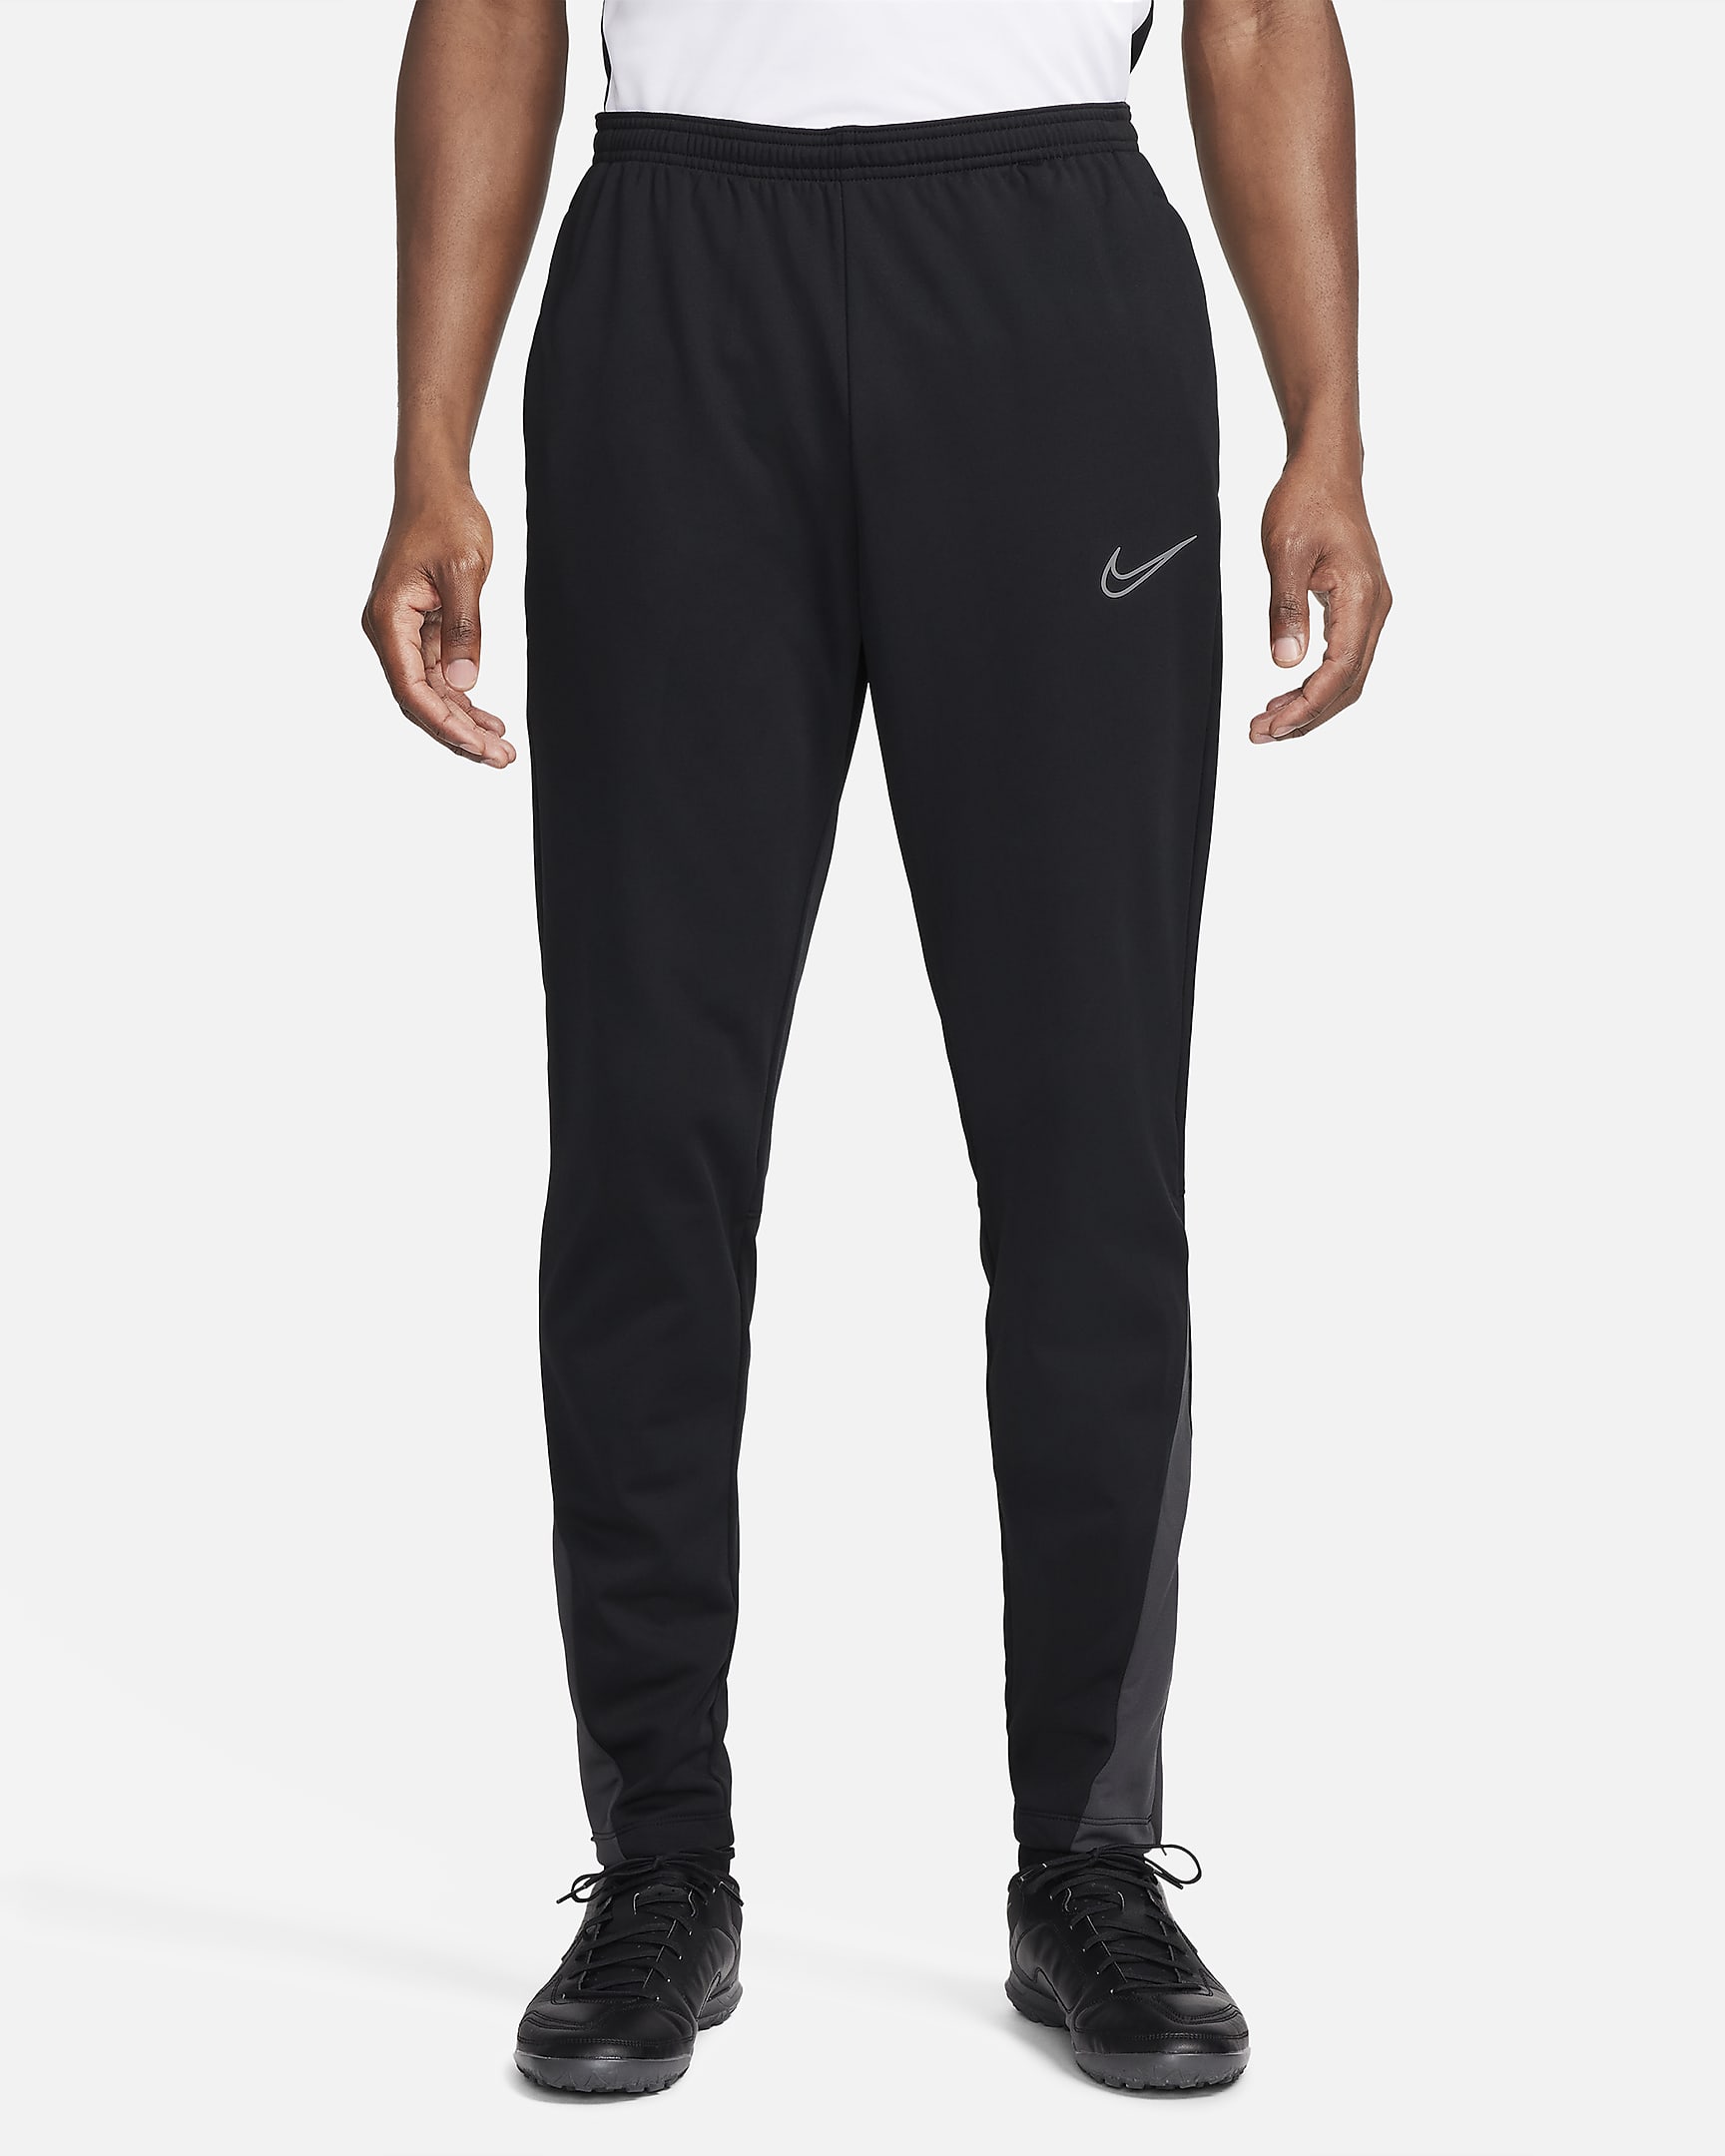 Nike Academy Winter Warrior Men's Therma-FIT Soccer Pants. Nike.com